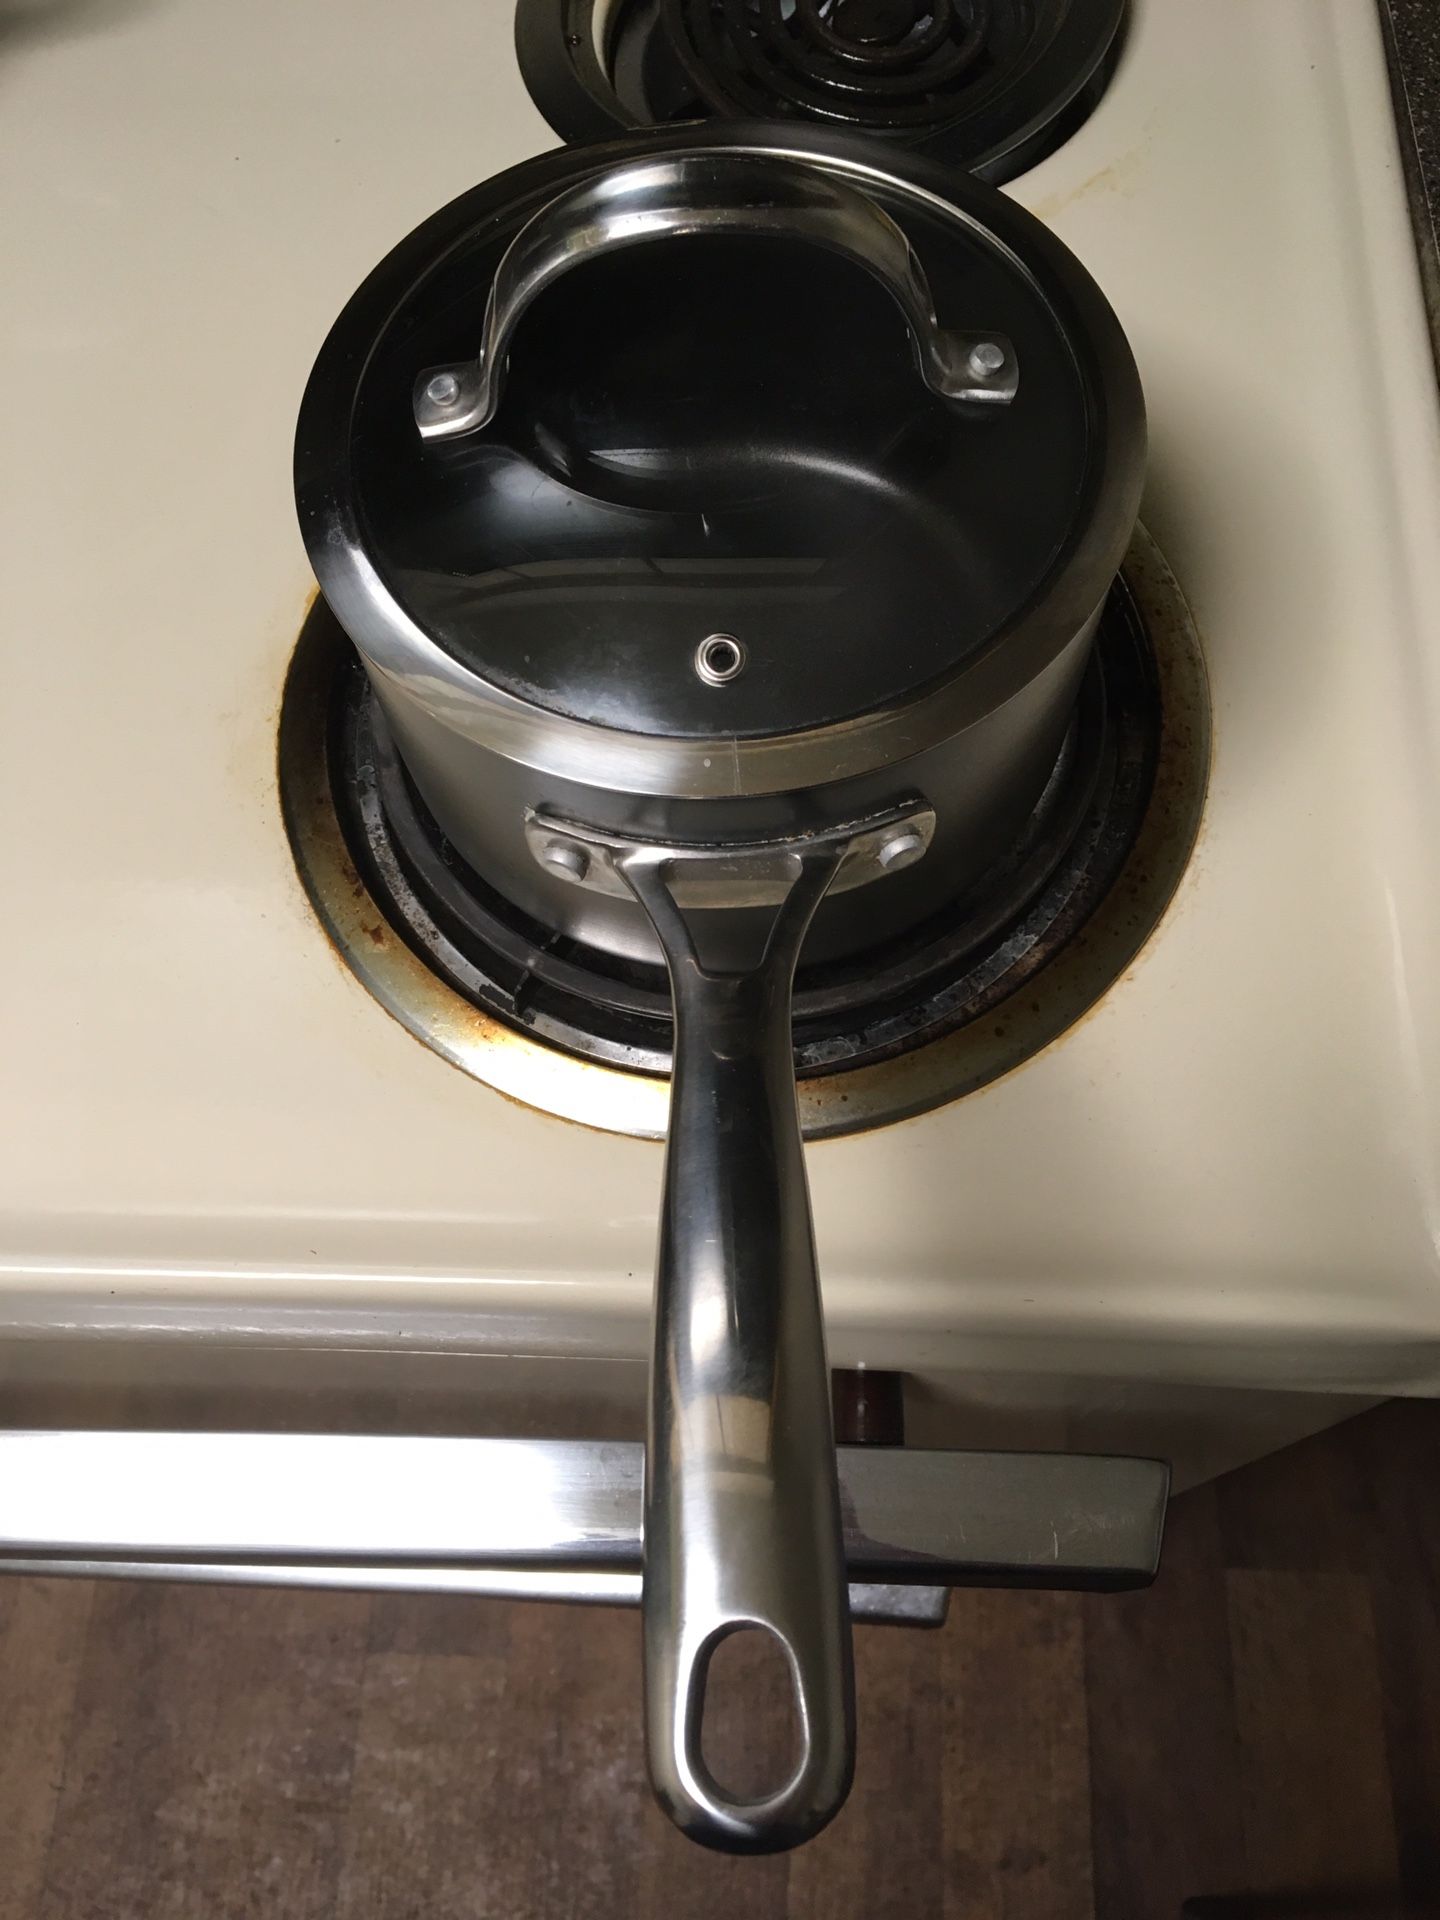 Cooks Standard pan with cover